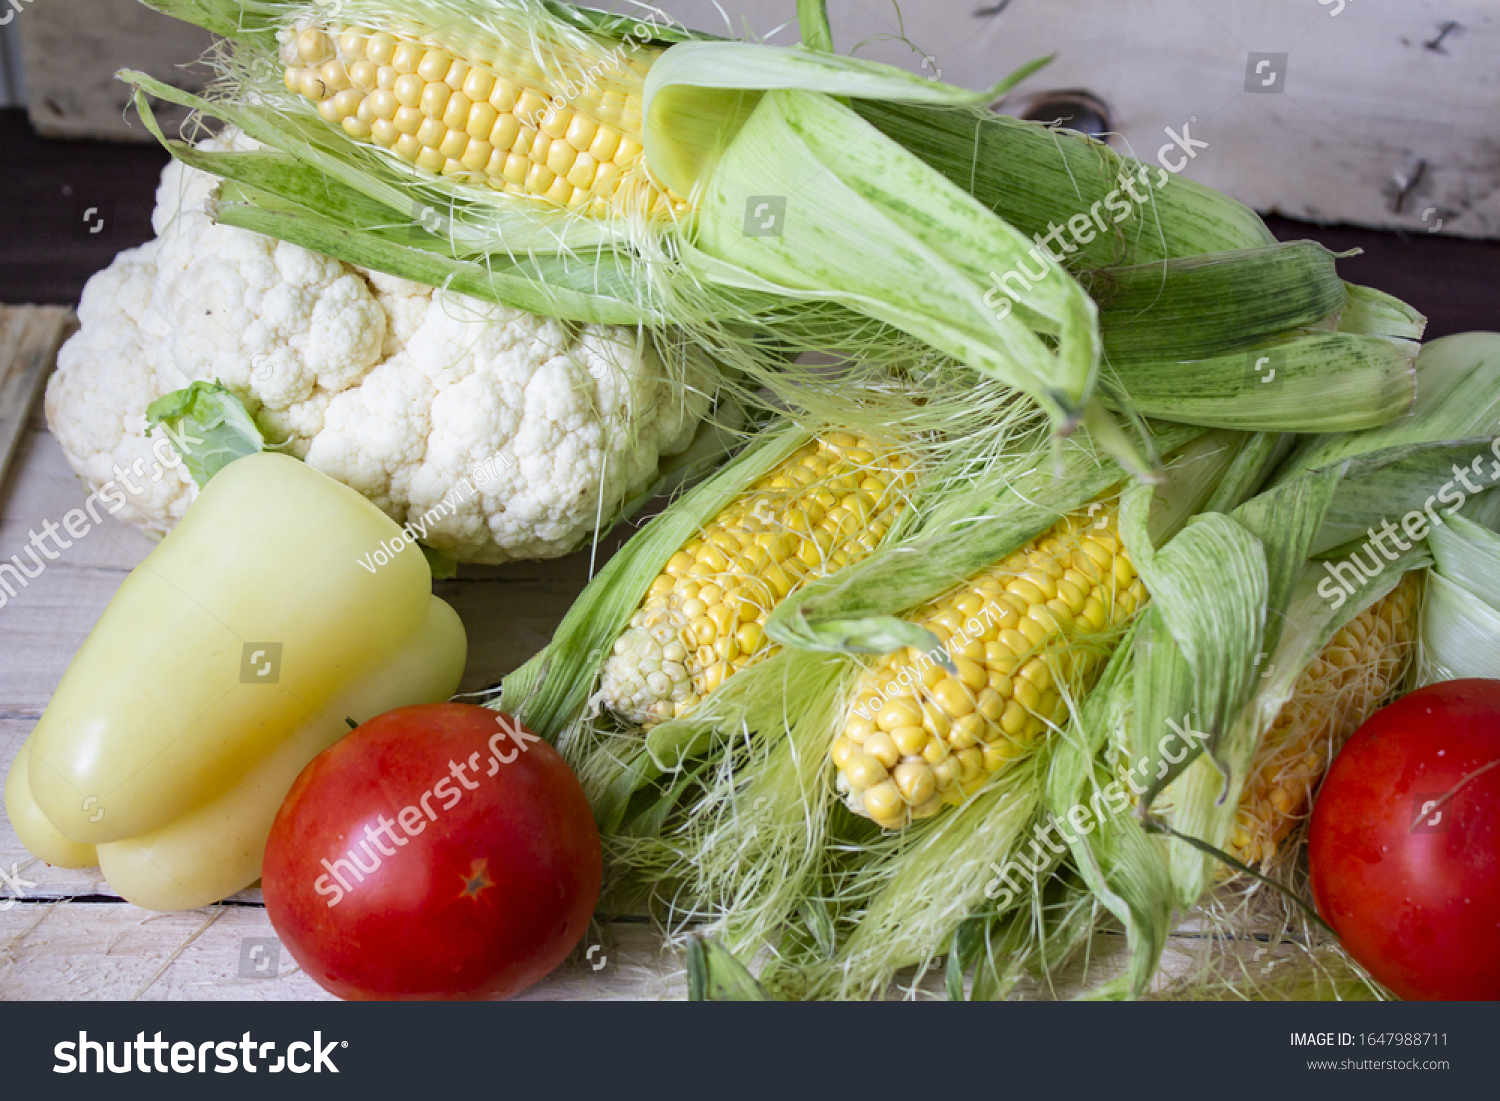 Homegrown vegetables. Fresh organic vegetables. Vegetables from the garden. Colorful vegetable. Healthy vegetable. Banner. Place for text #1647988711